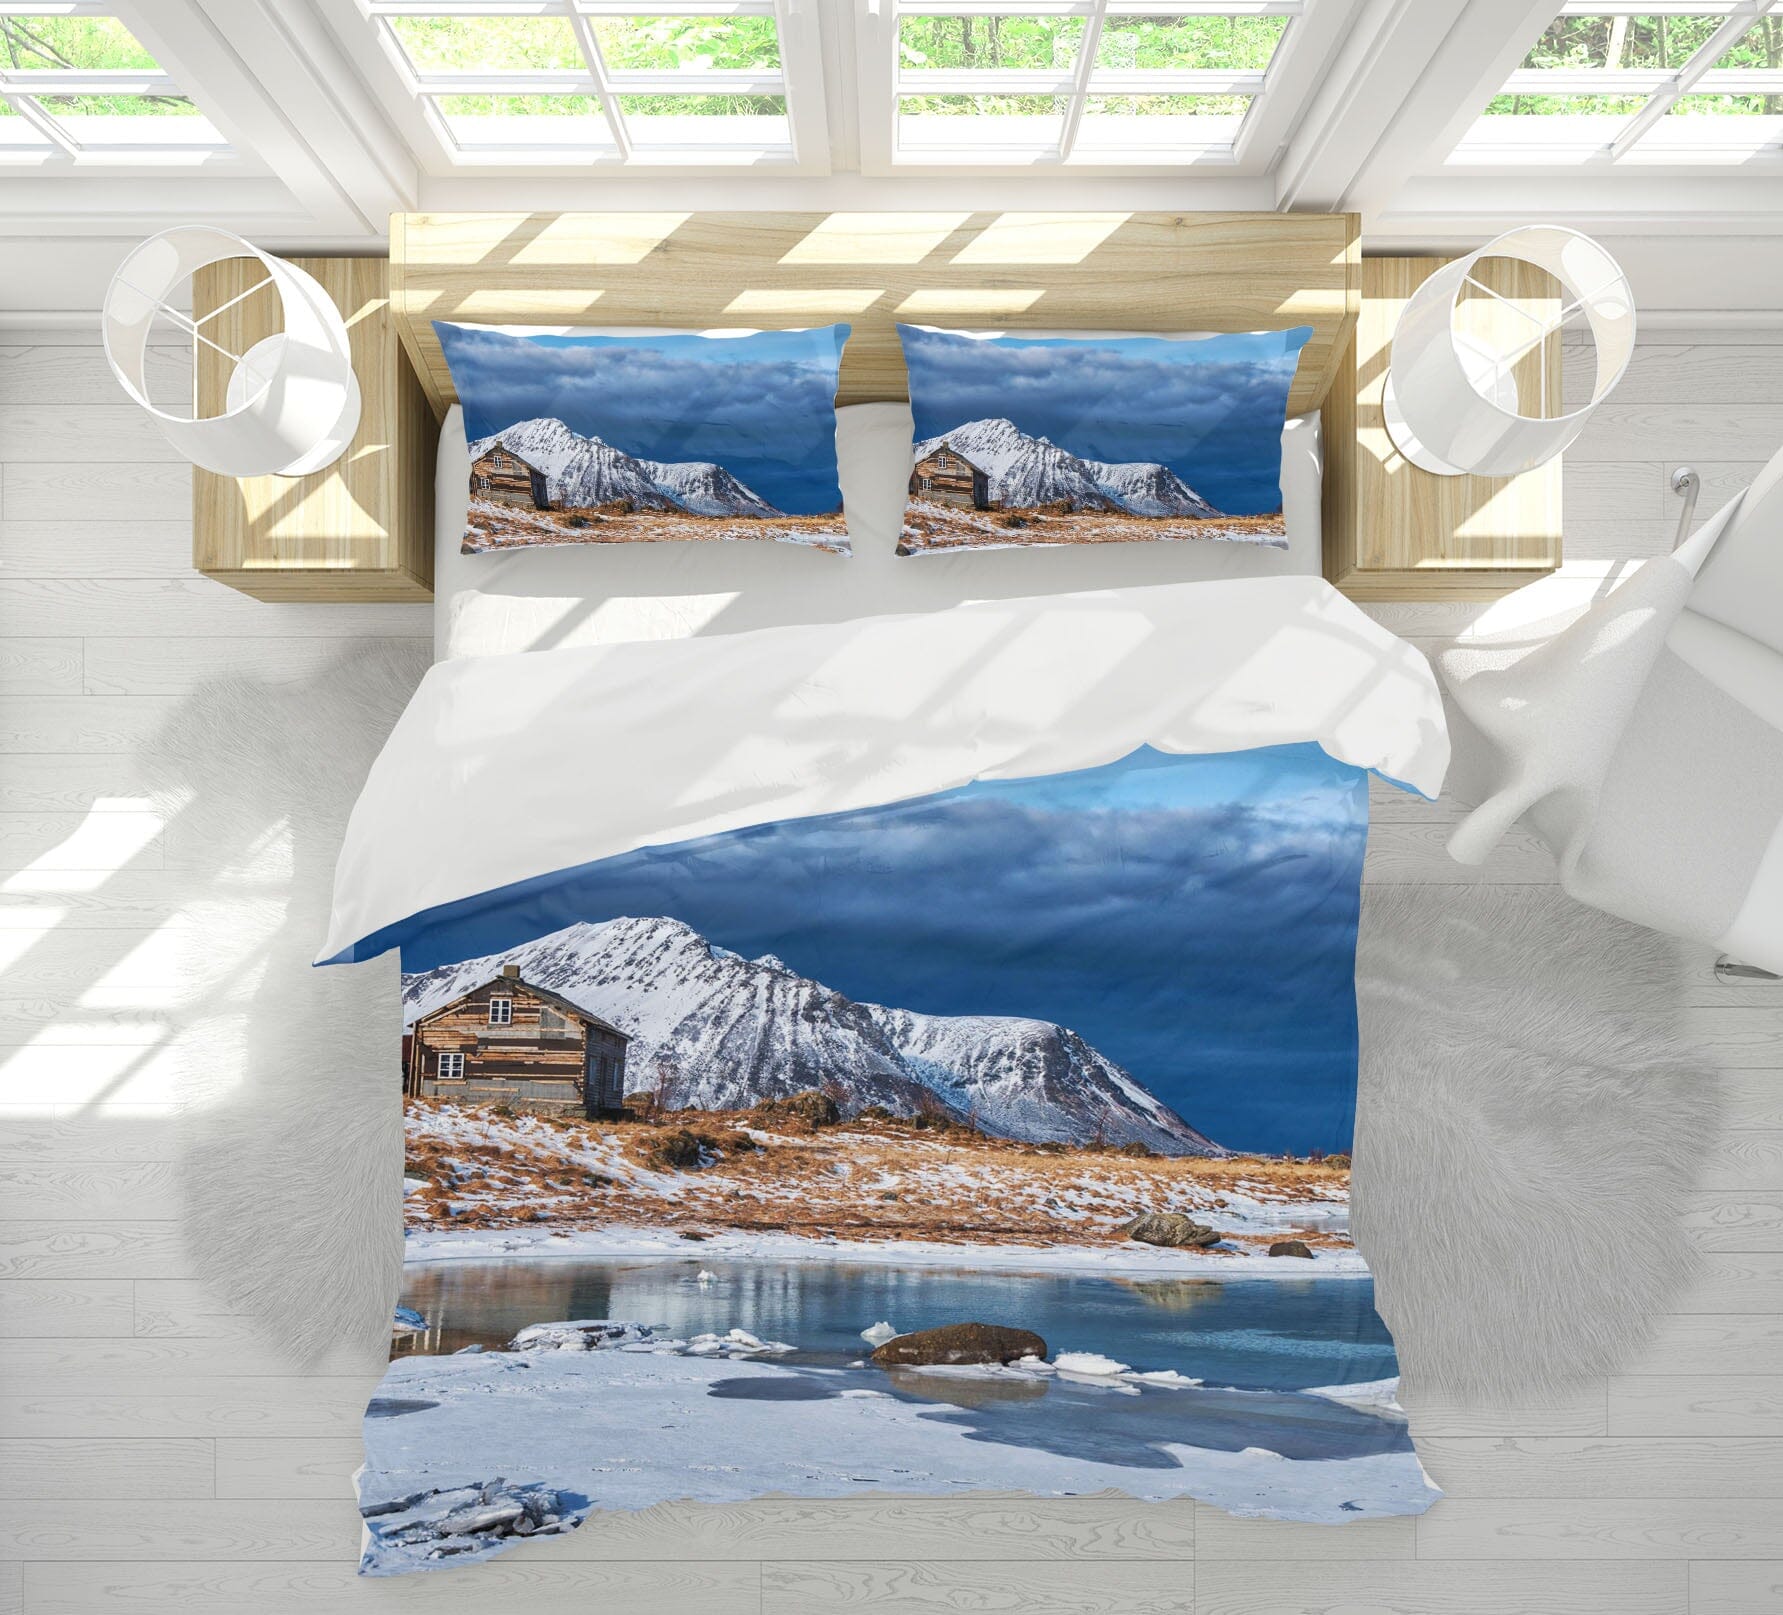 3D Snow Mountain 2142 Marco Carmassi Bedding Bed Pillowcases Quilt Quiet Covers AJ Creativity Home 